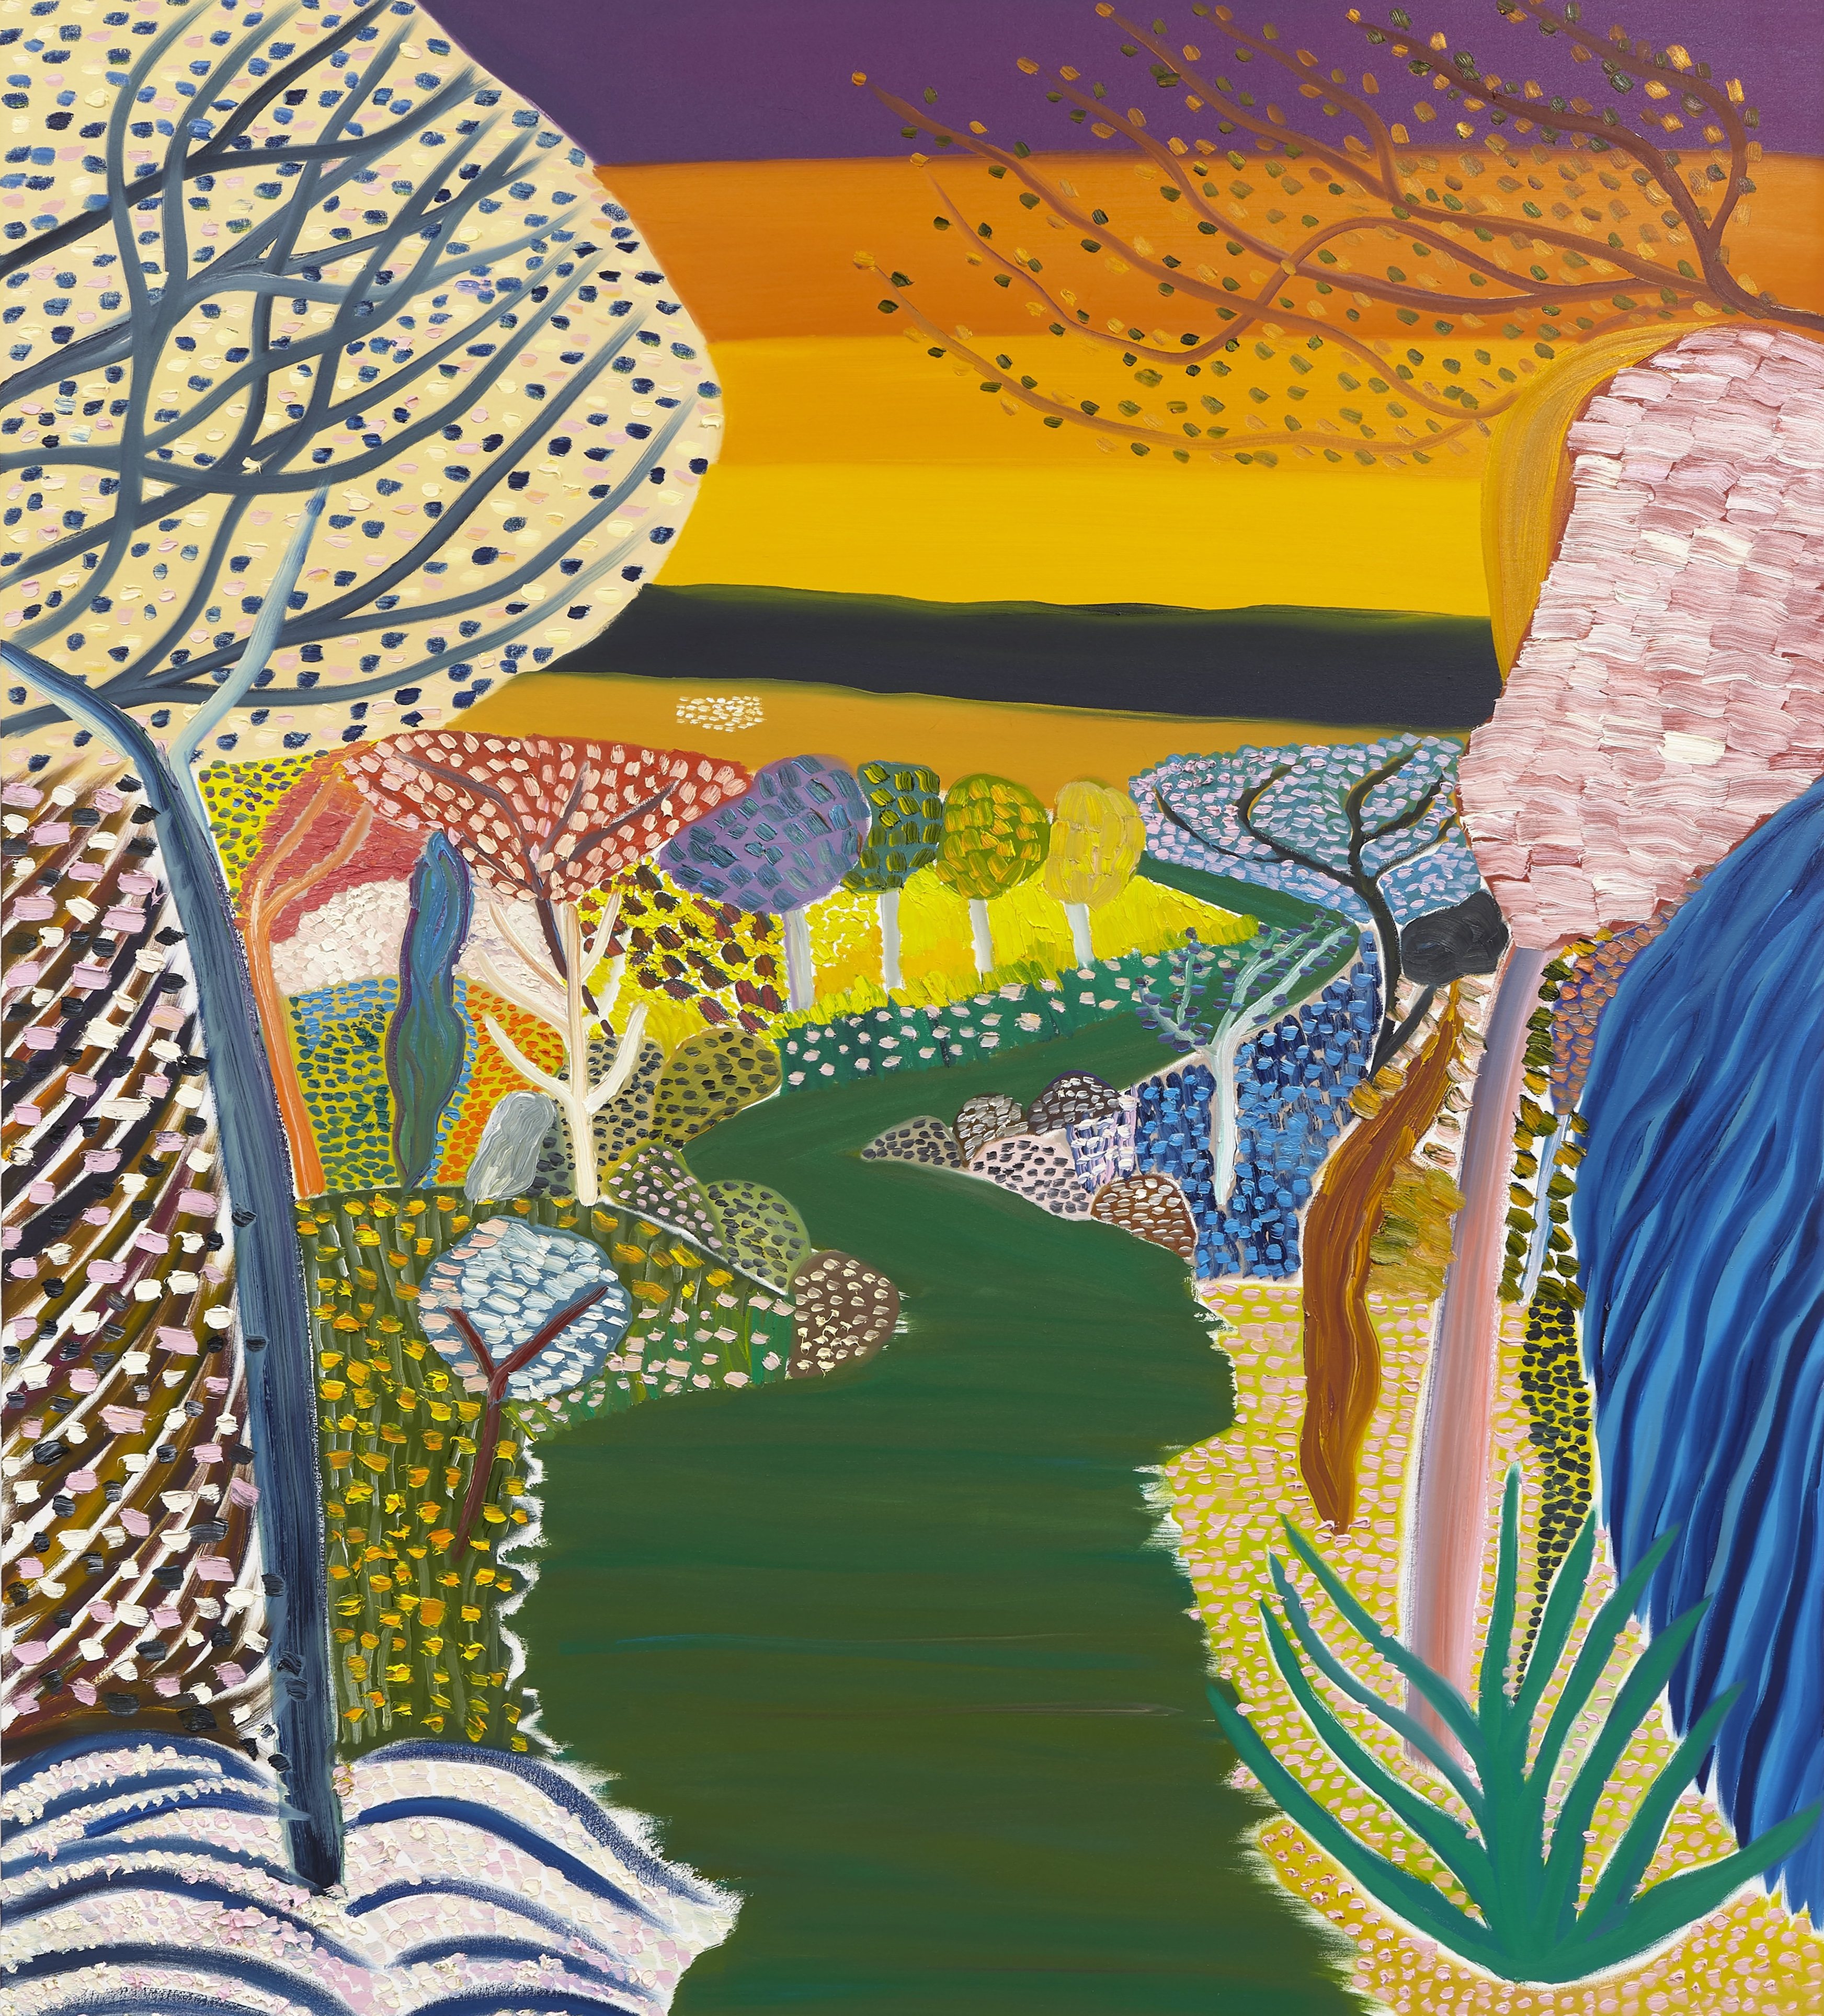 Matthew Wong’s River at Dusk (2018) sold for US $4.6 million in December 2020 – and that’s not even his most expensive work. Photo: Phillips Auction